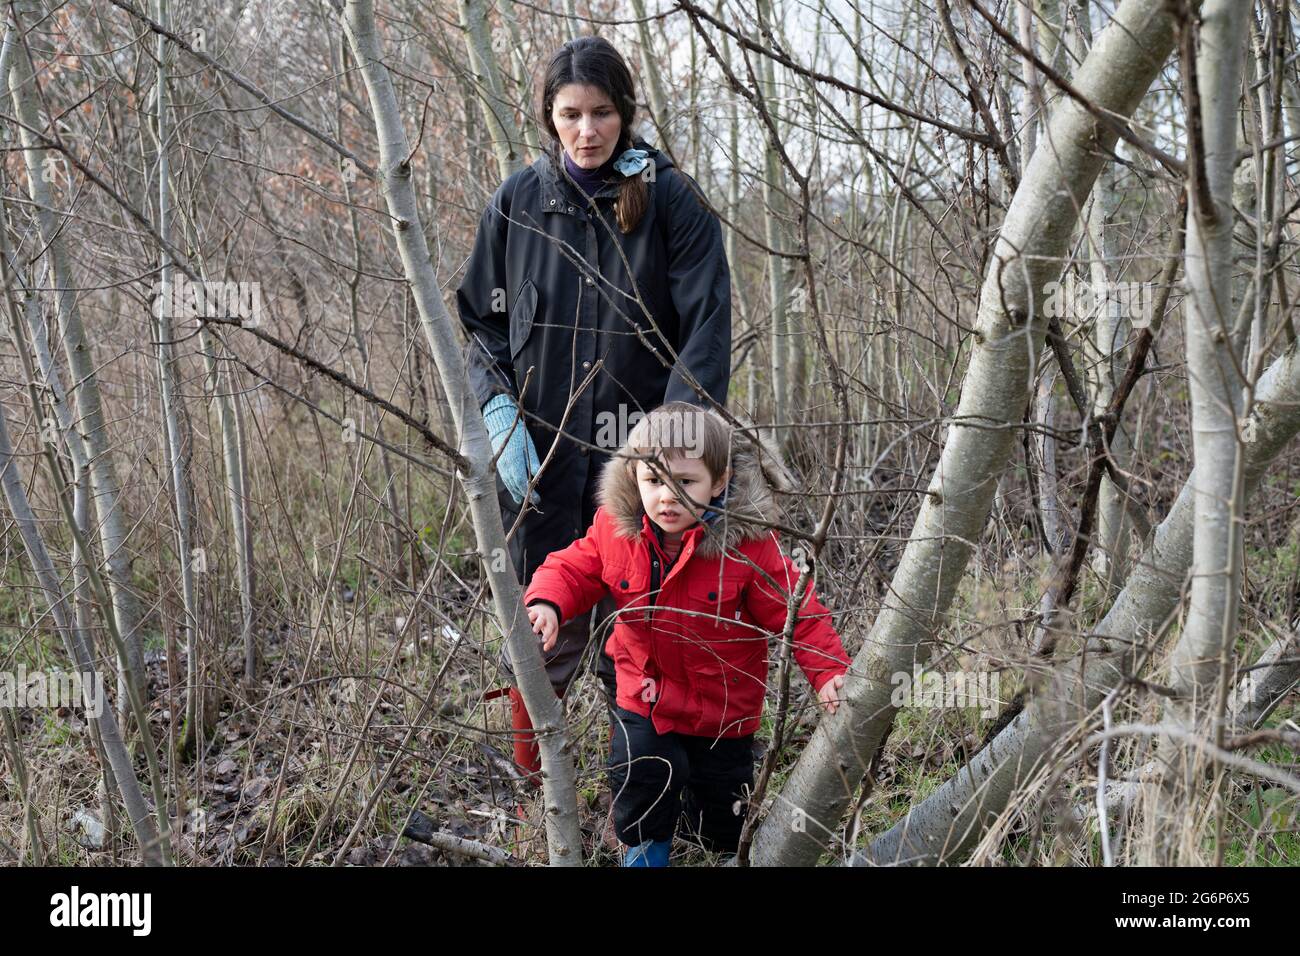 A mother and a son walking in Wanstead Flats in East London Stock Photo